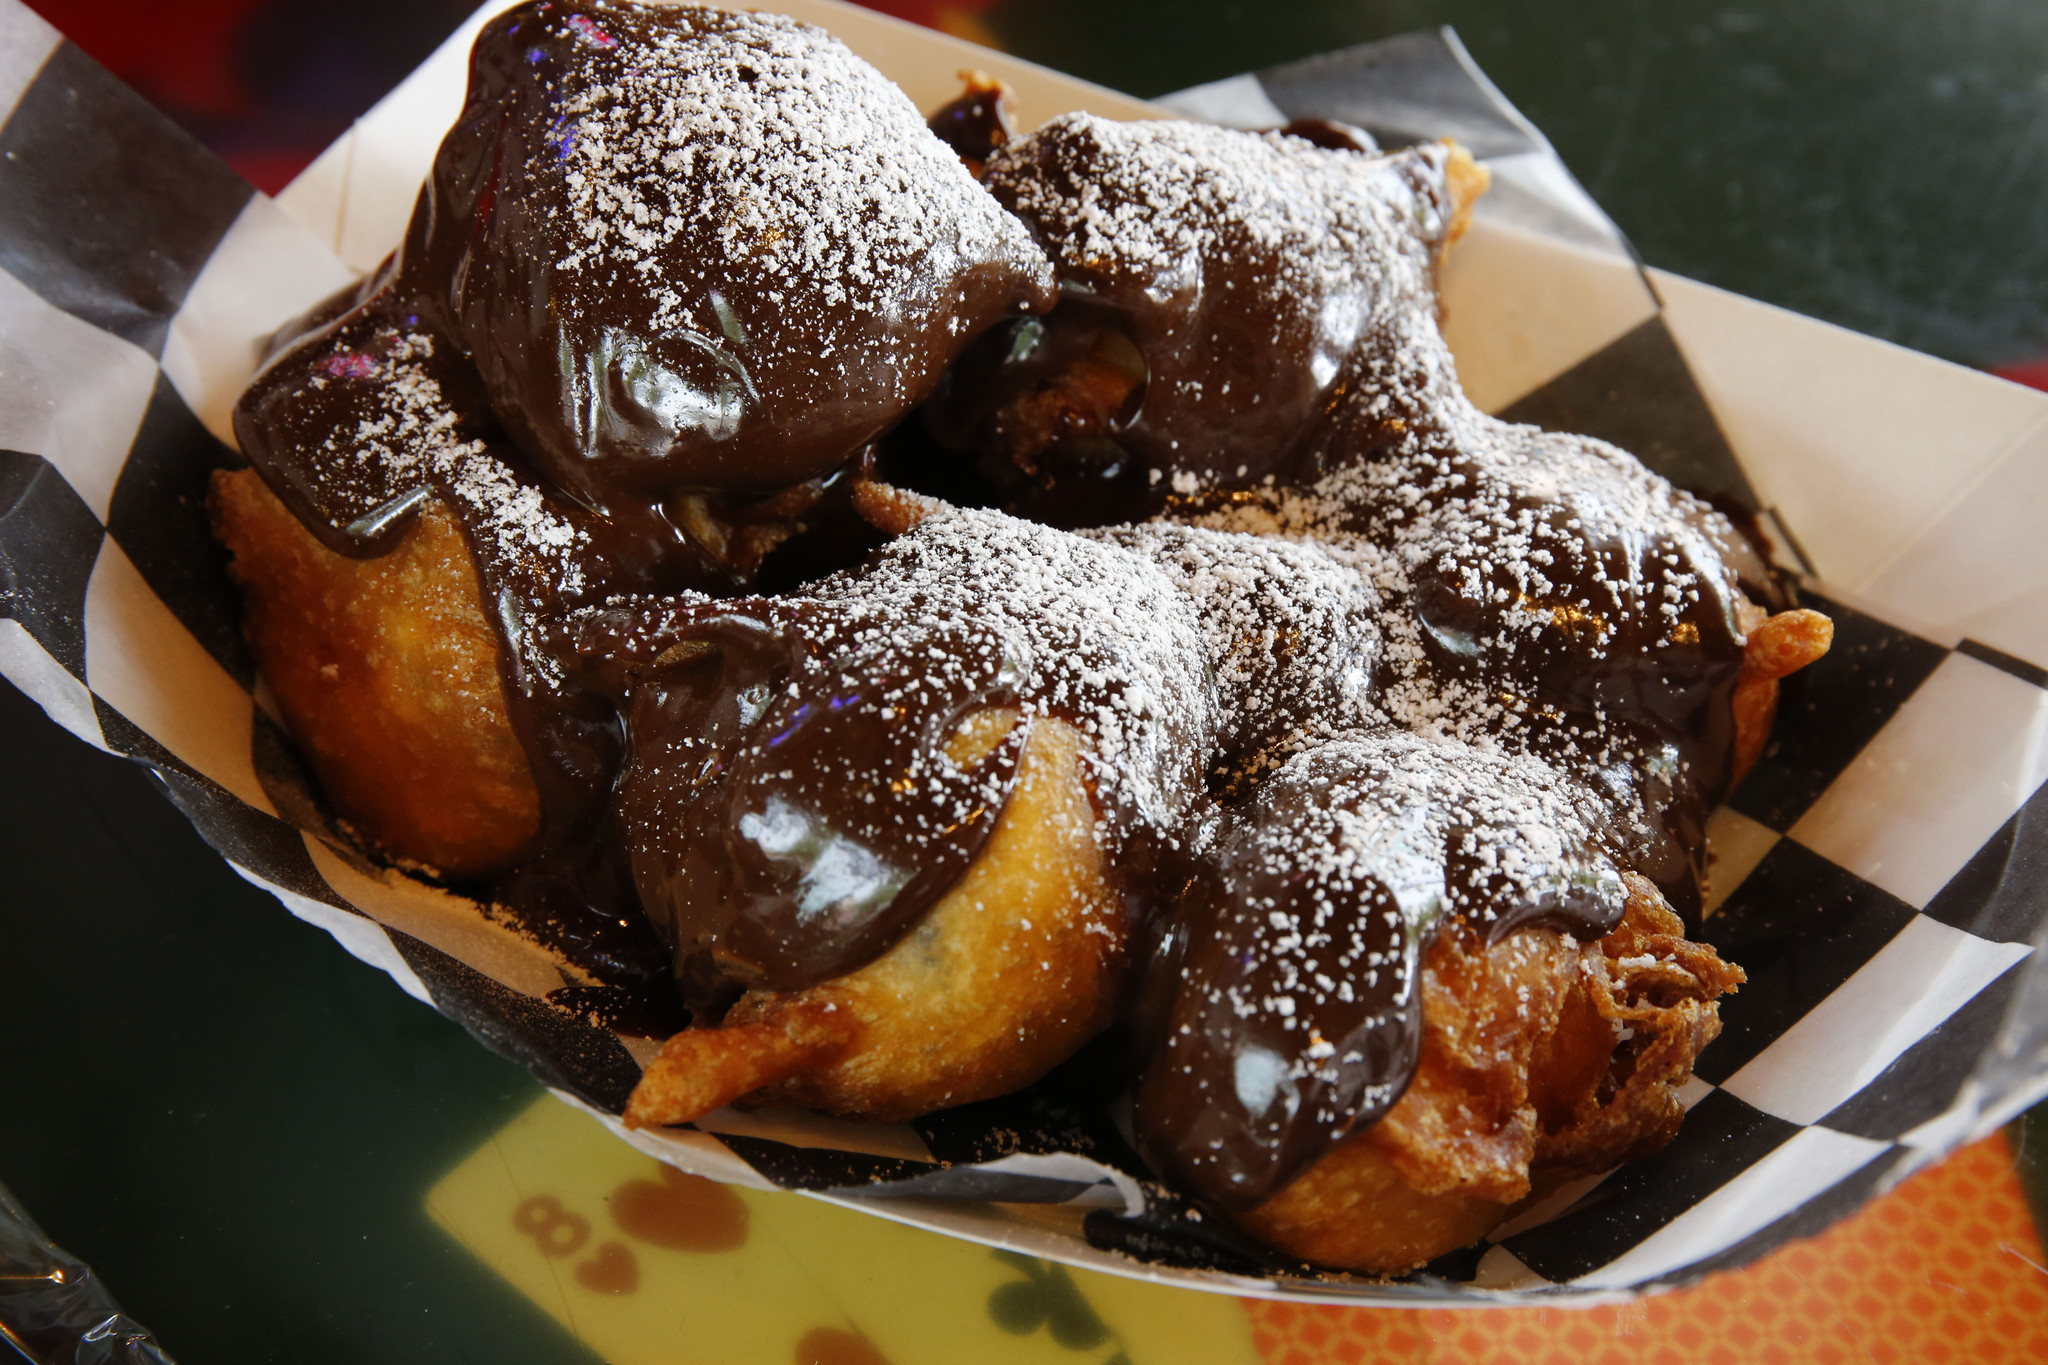 Top 5 foods at Six Flags Great America - Chicago Tribune